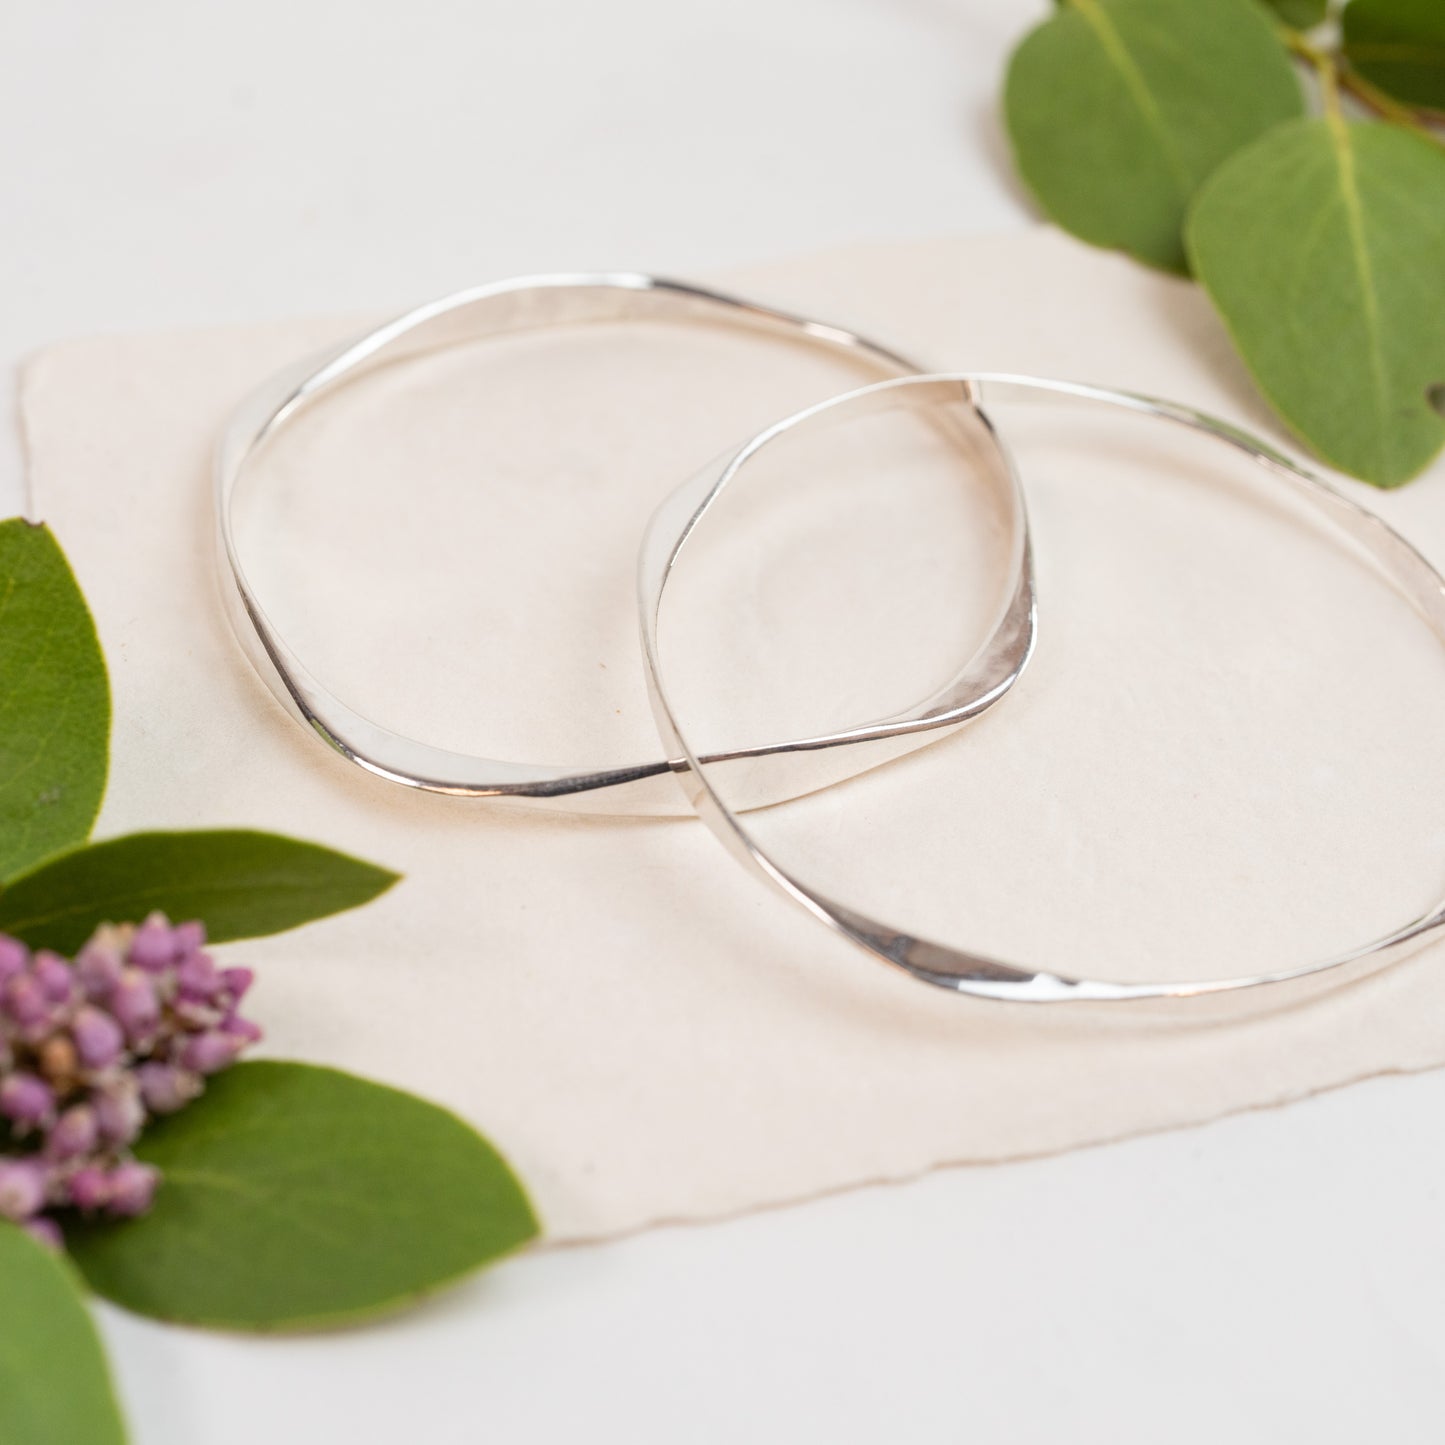 Bangle Bracelets - Sterling Silver Custom hand forged Four Way